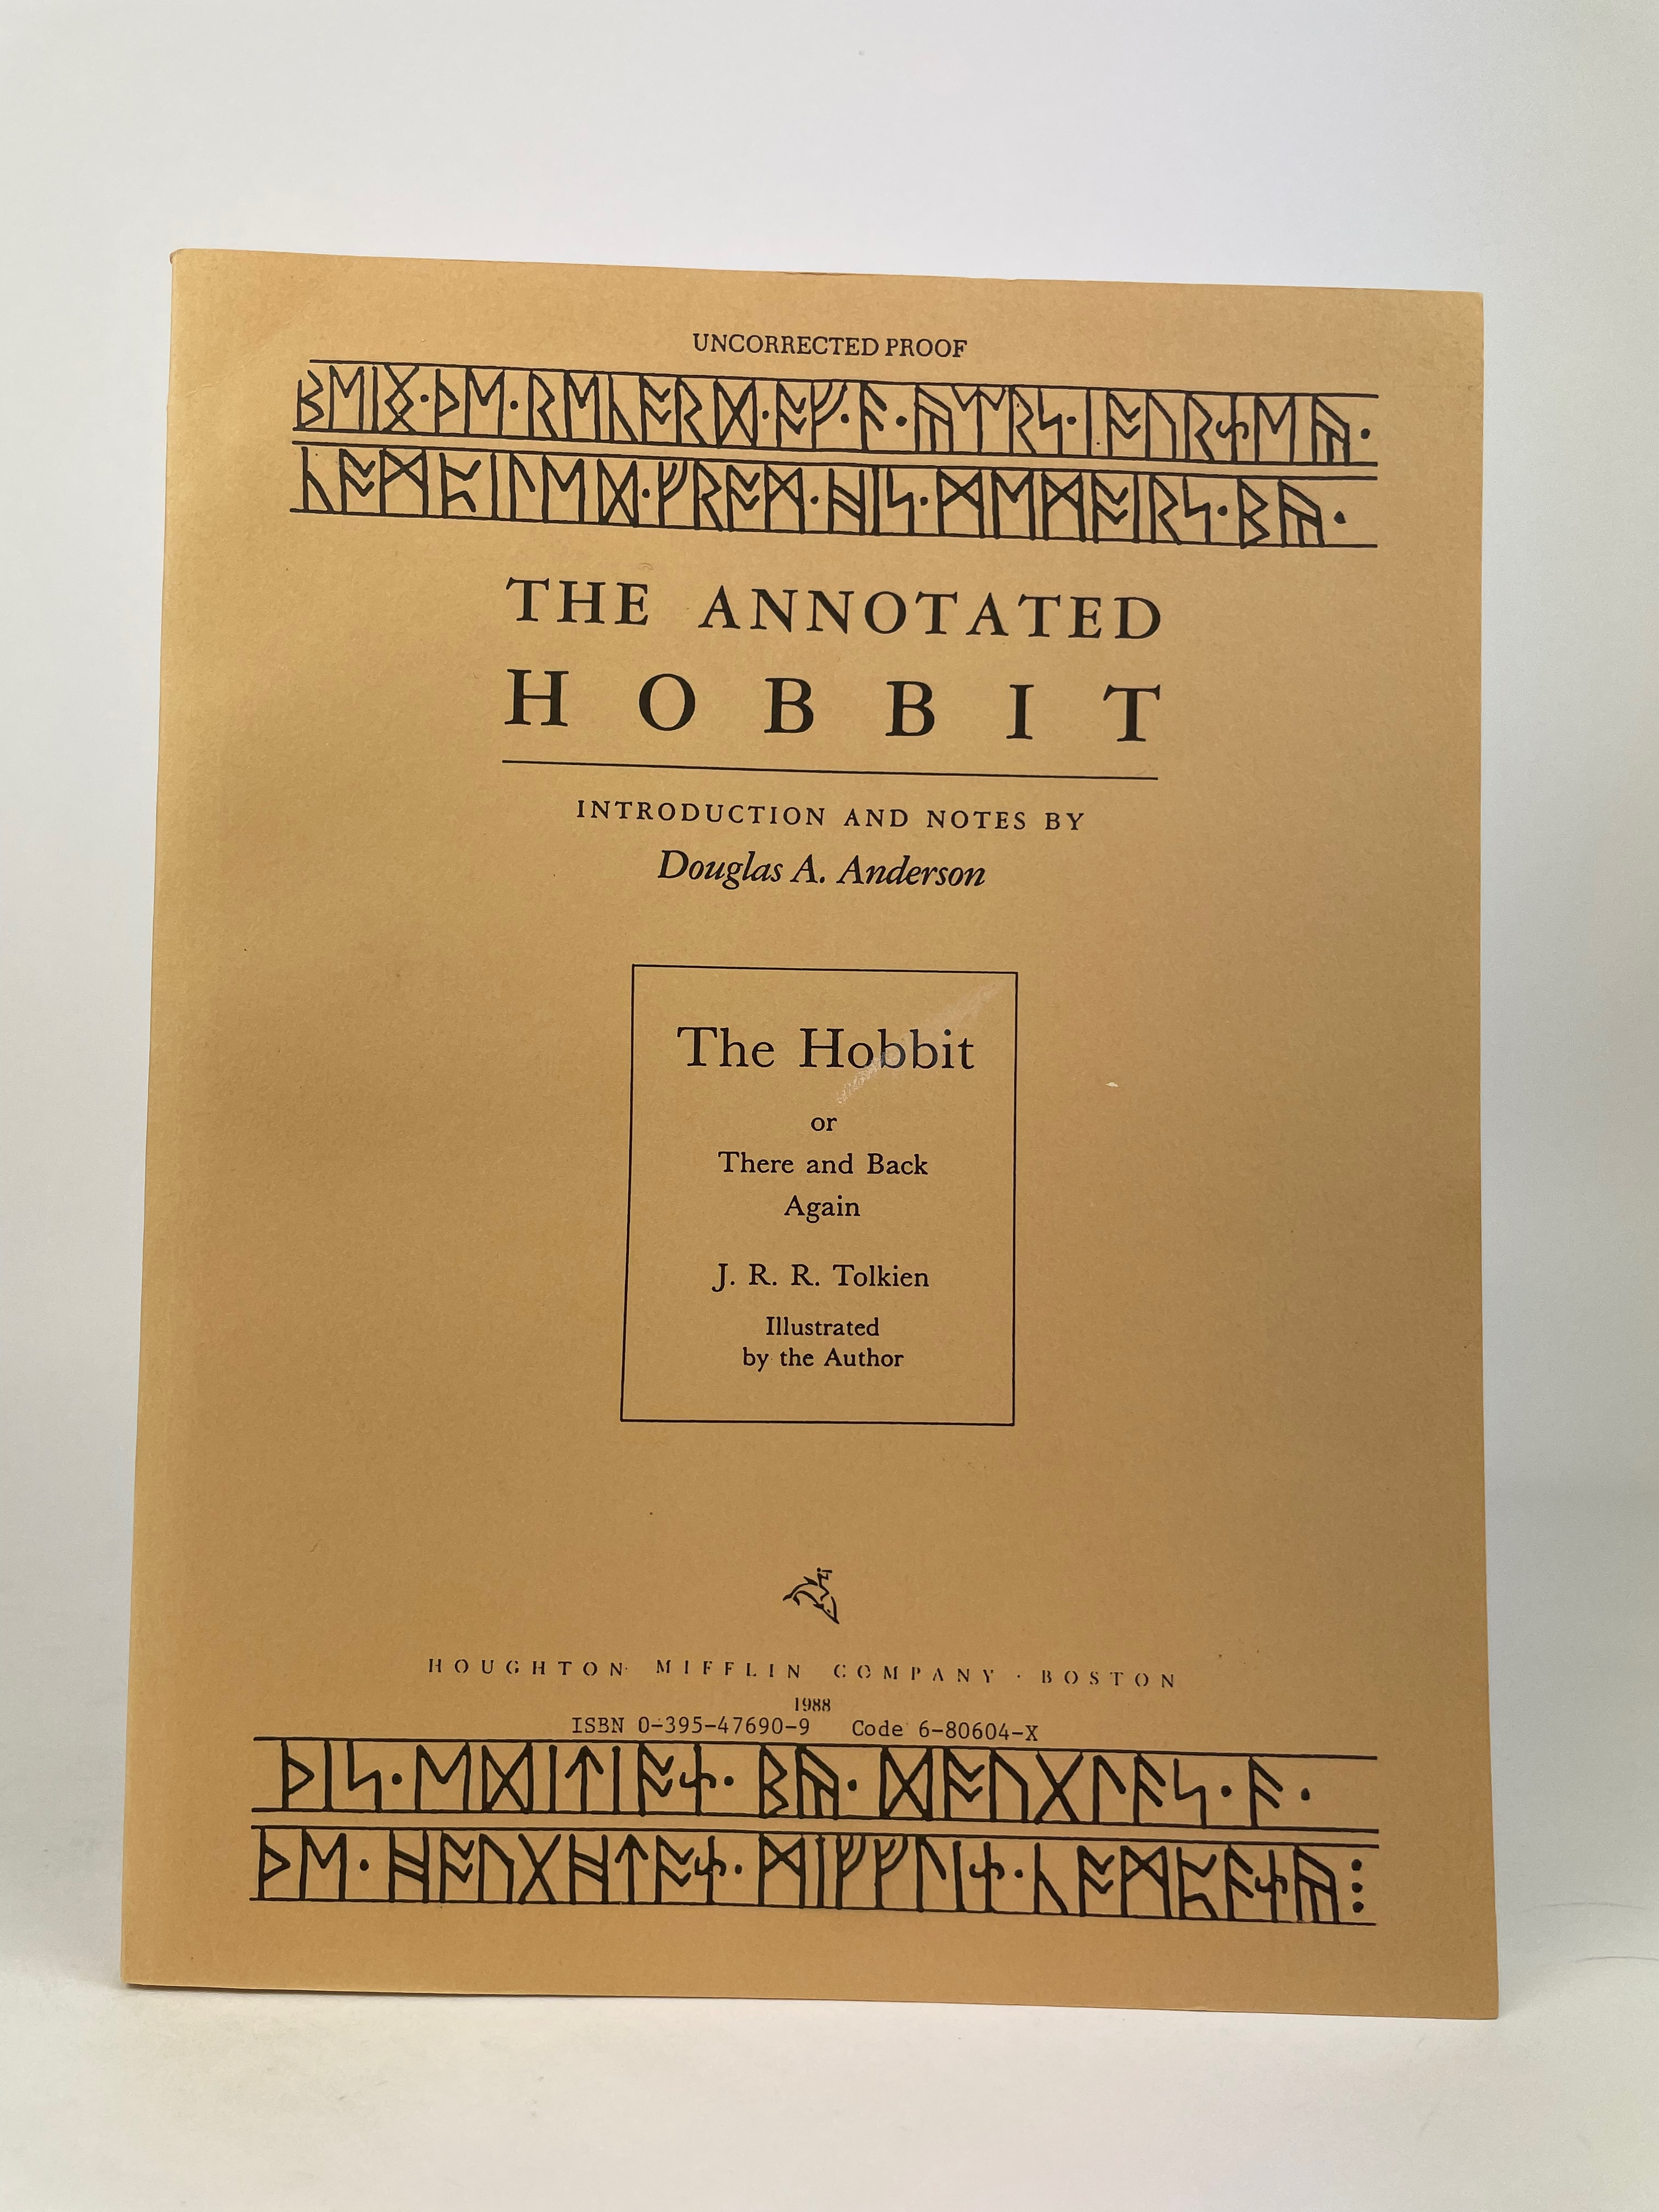 Advance Uncorrected Proof of The Annotated Hobbit by Douglas A. Anderson